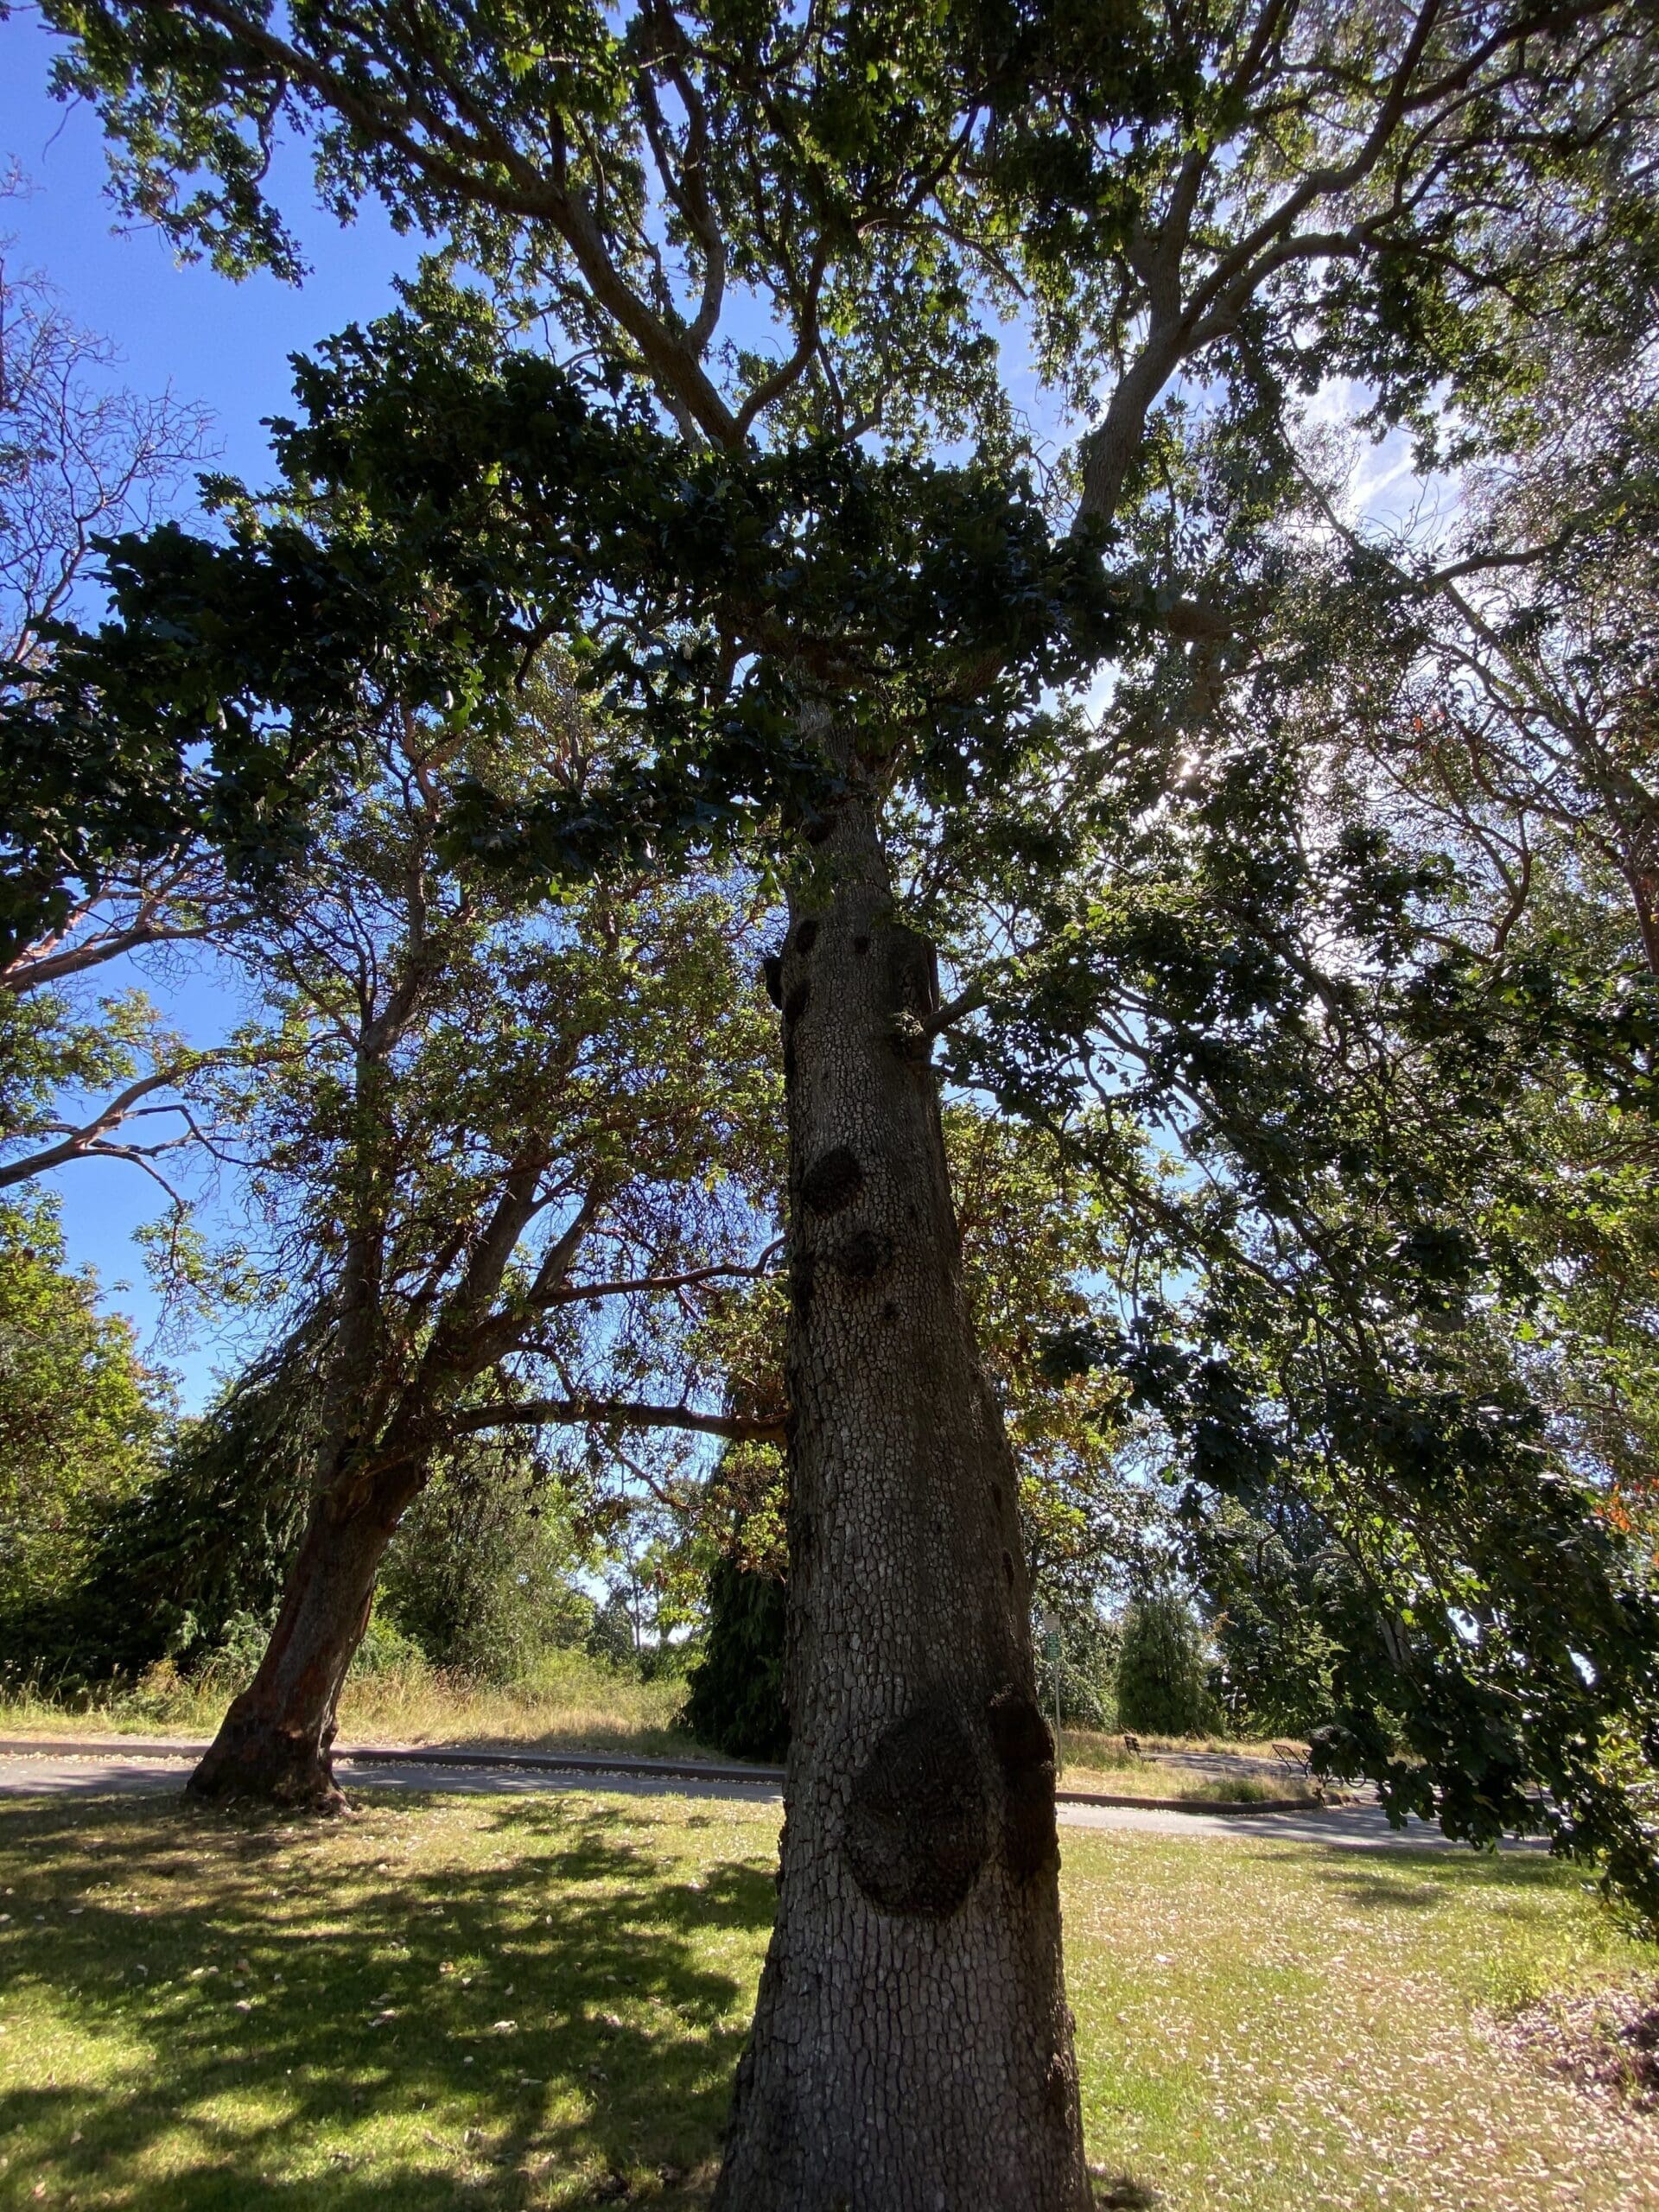 A huge Garry Oak Tree, part of the endangered and protected species in the City of Victoria at Beacon Hill Park.